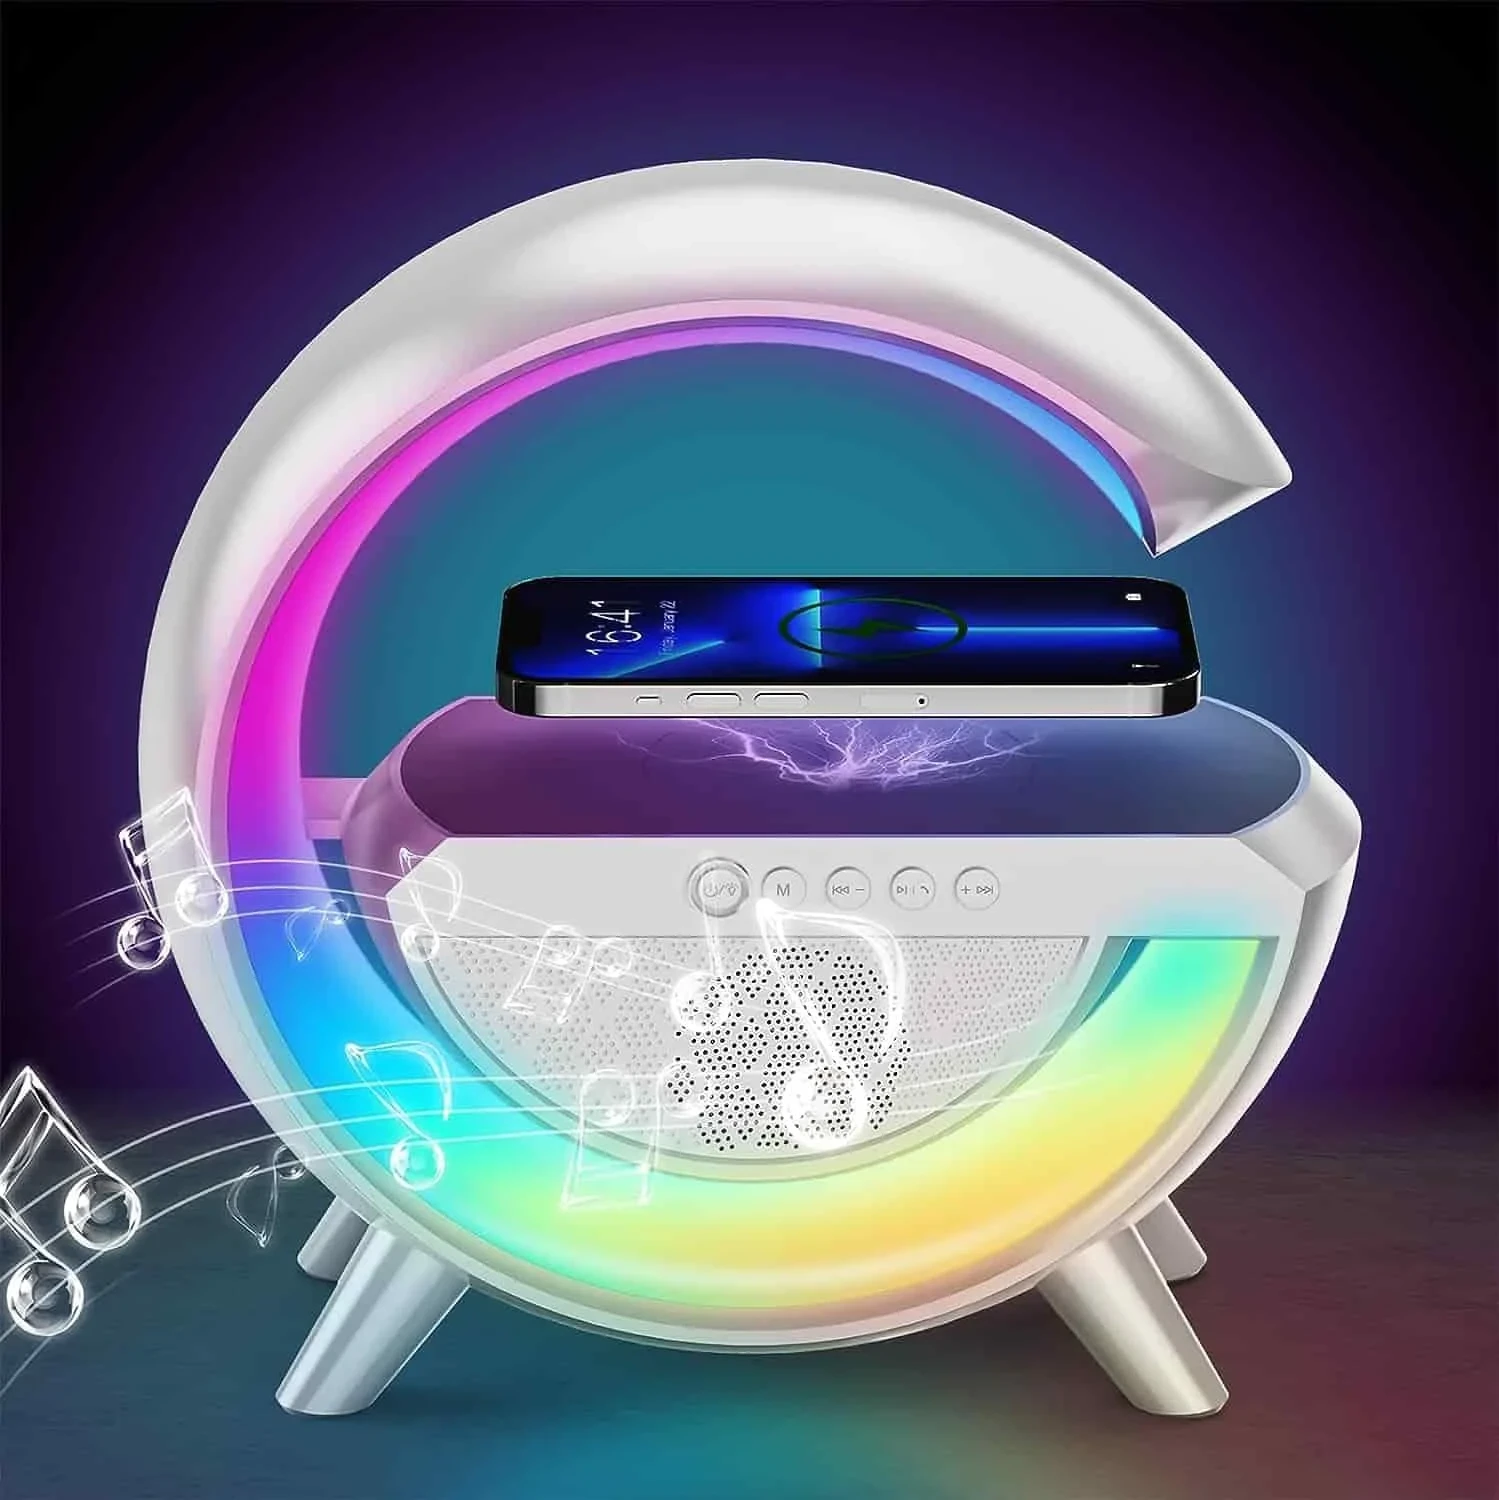 Alexsix Wireless Charger Atmosphere Lamp | New Wireless G Speaker Charger with Desk Lamp Bedside Night Light Smart Light Sound Machine